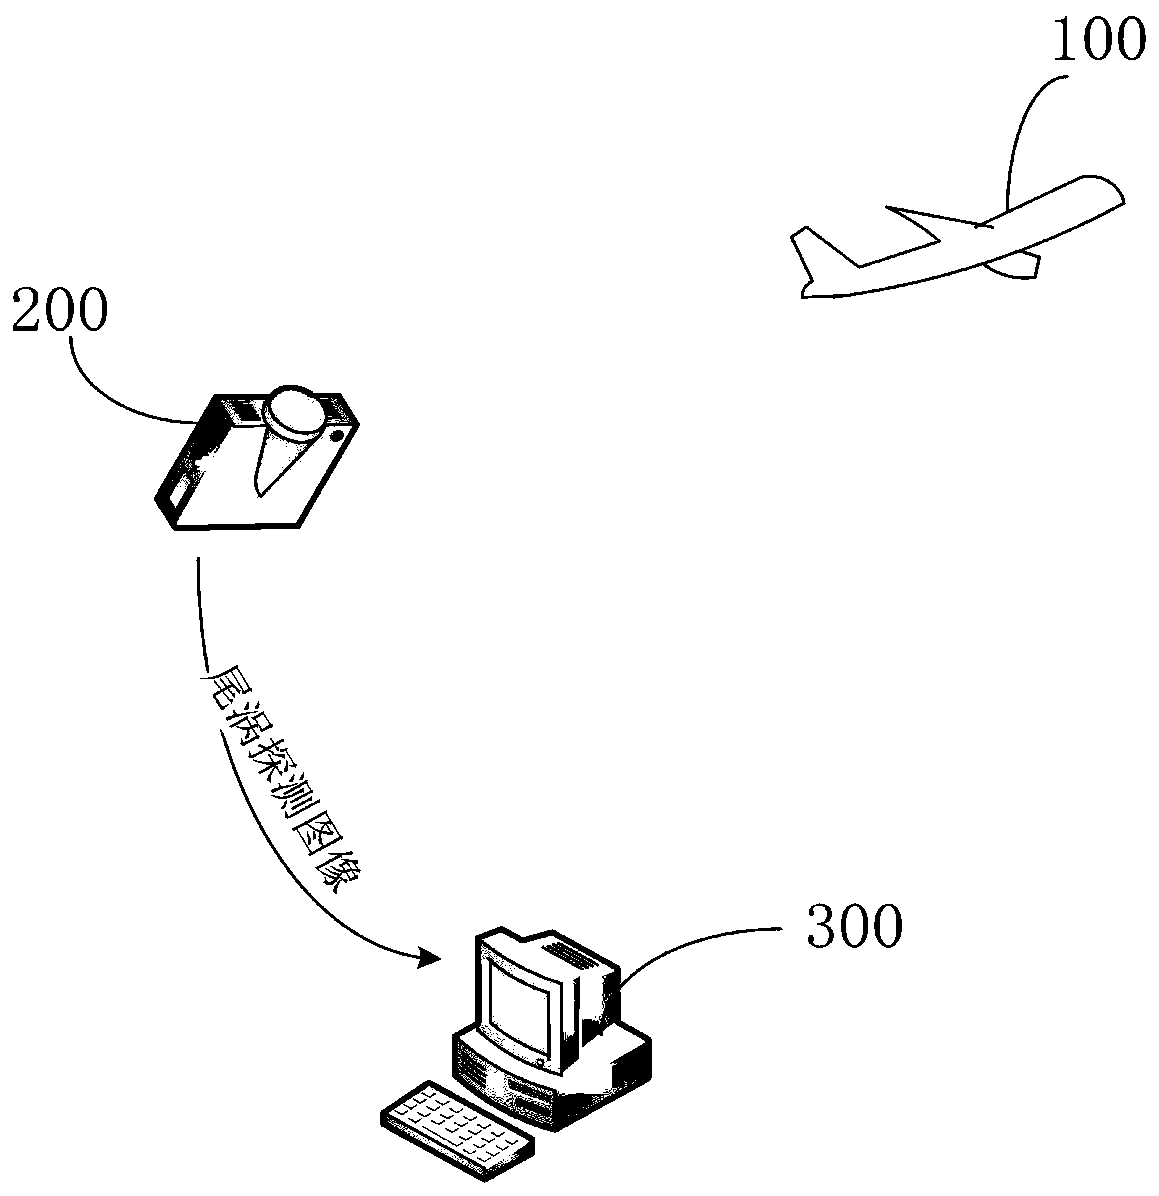 Aircraft tail vortex recognition method and system based on convolutional neural network